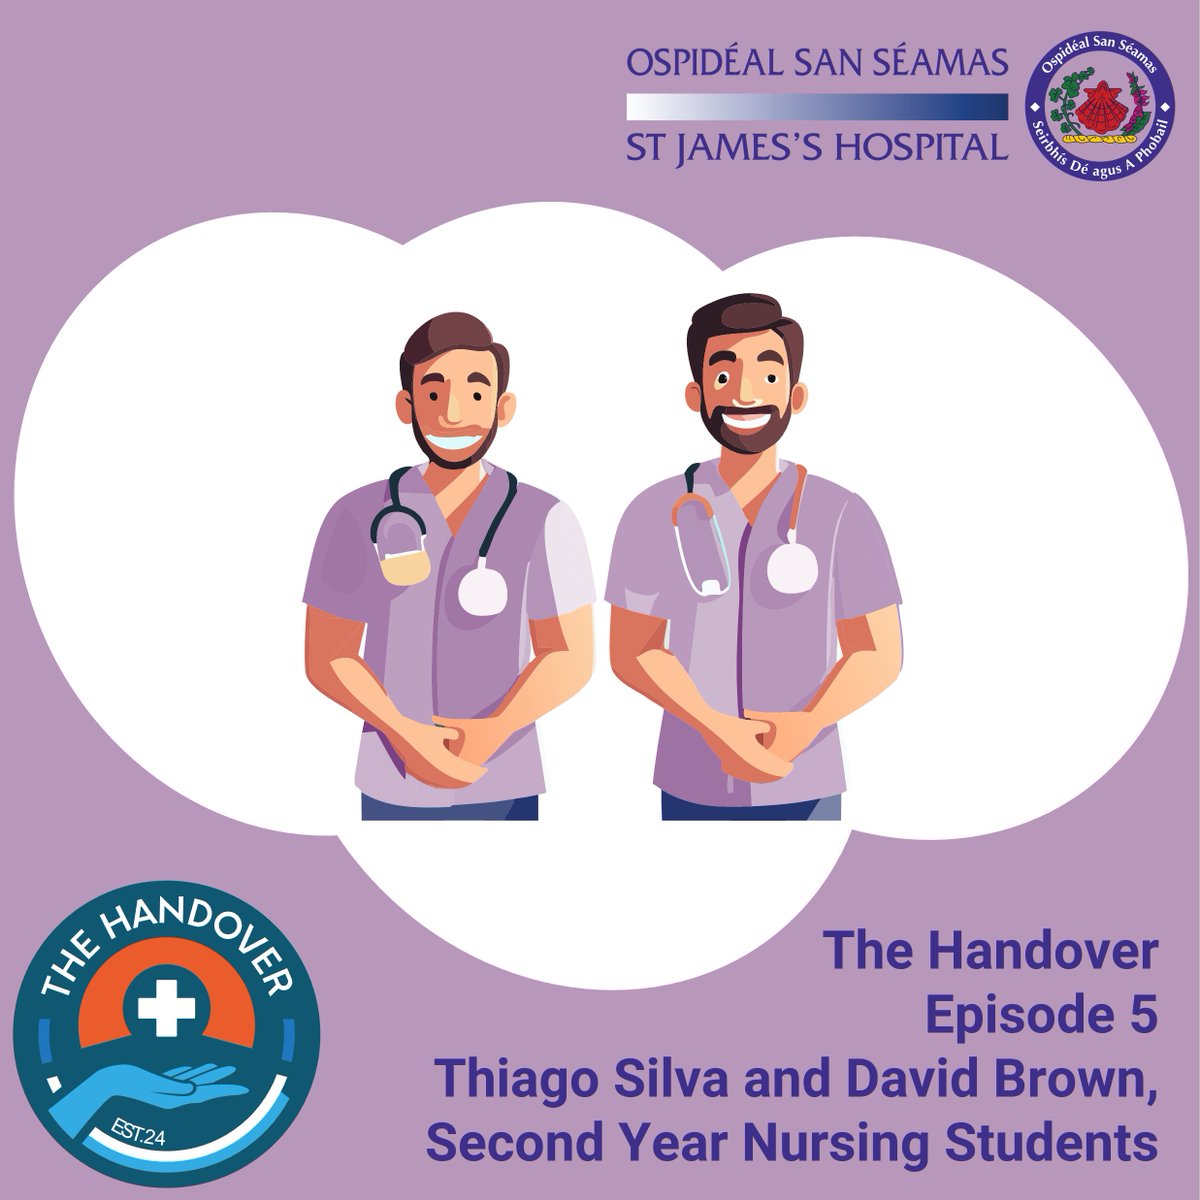 🥳New podcast!🥳 The fifth episode of our podcast, The Handover, is available to listen to wherever you get your podcasts. This episode is a conversation with Thiago Silva and David Brown, two mature students pursuing their degree in nursing👨‍⚕️✍️ 👂bit.ly/TheHandoverSJH